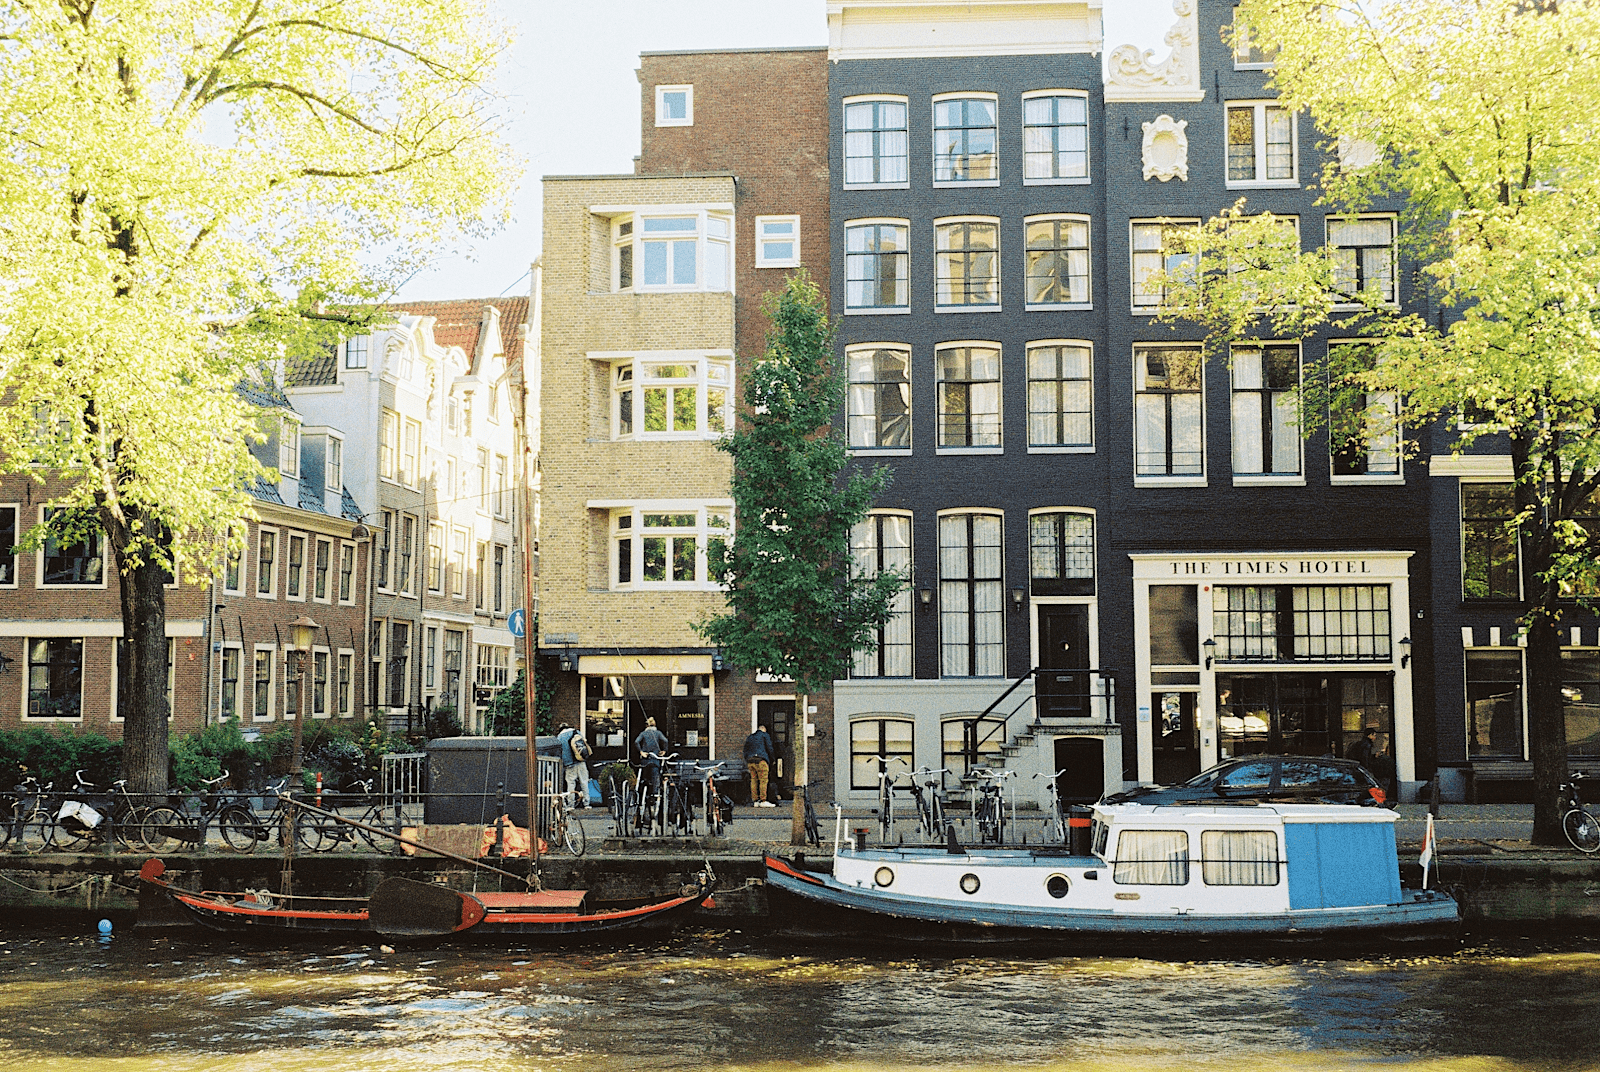 apartment buildings near the canal with small boats